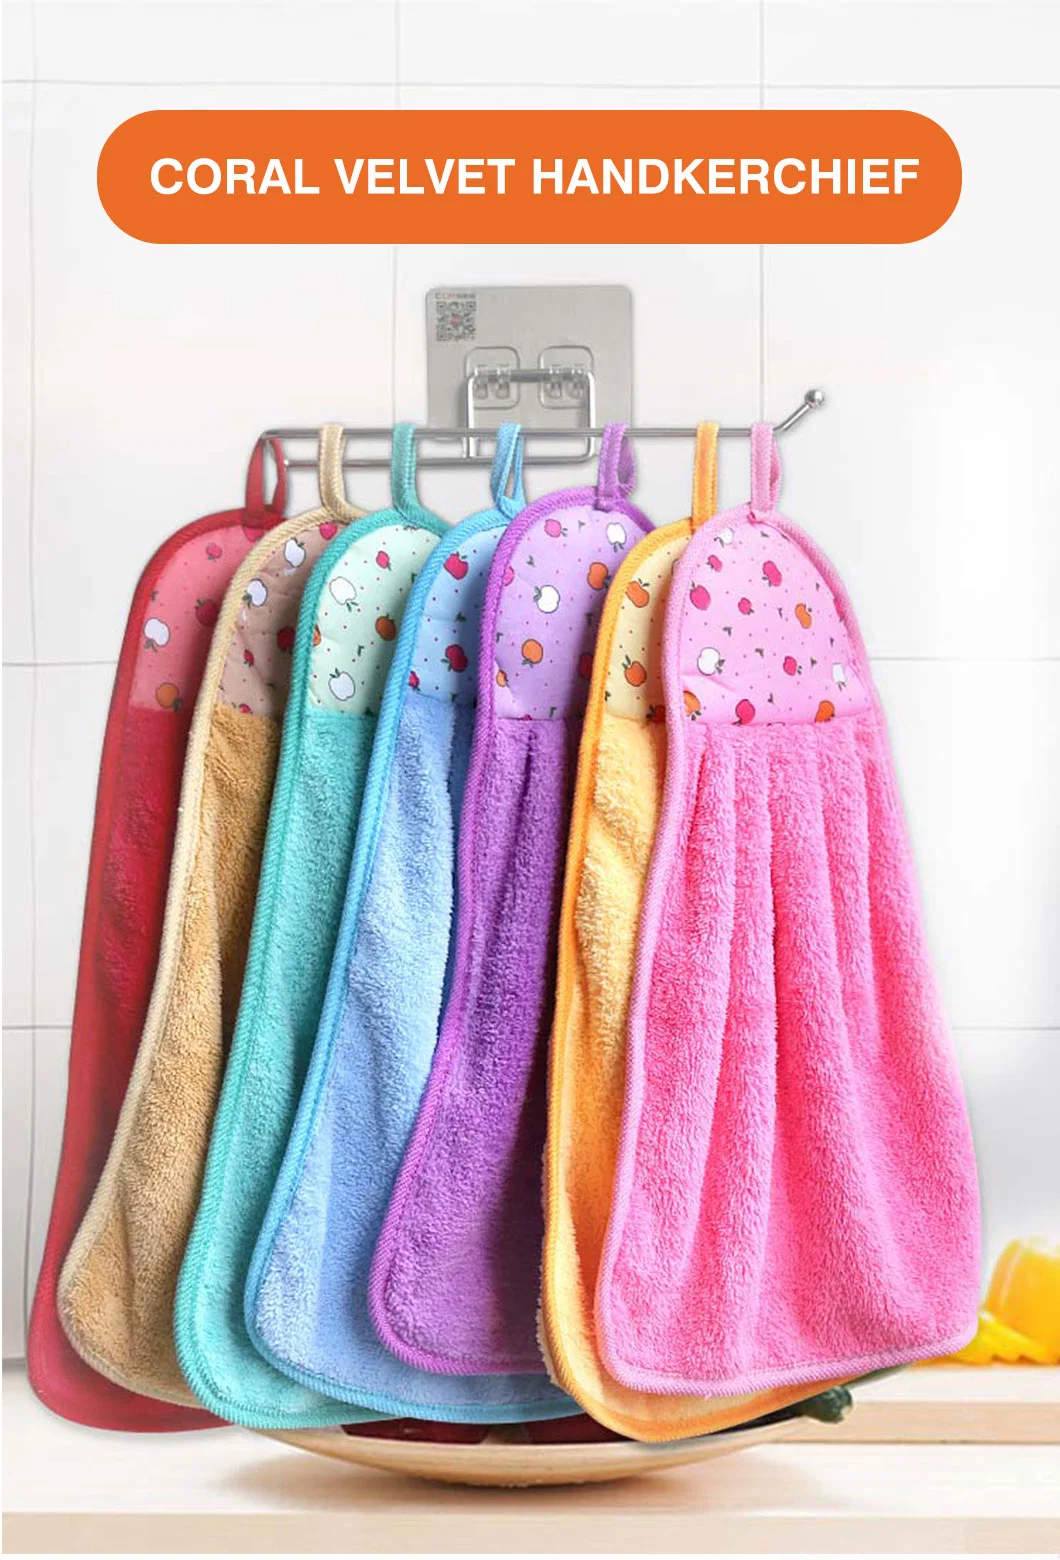 Factory Price Colorful Hand Towel Hanging Lovely Soft Absorbent Thick Coral Velvet Hand Towel Microfiber Kitchen Rag